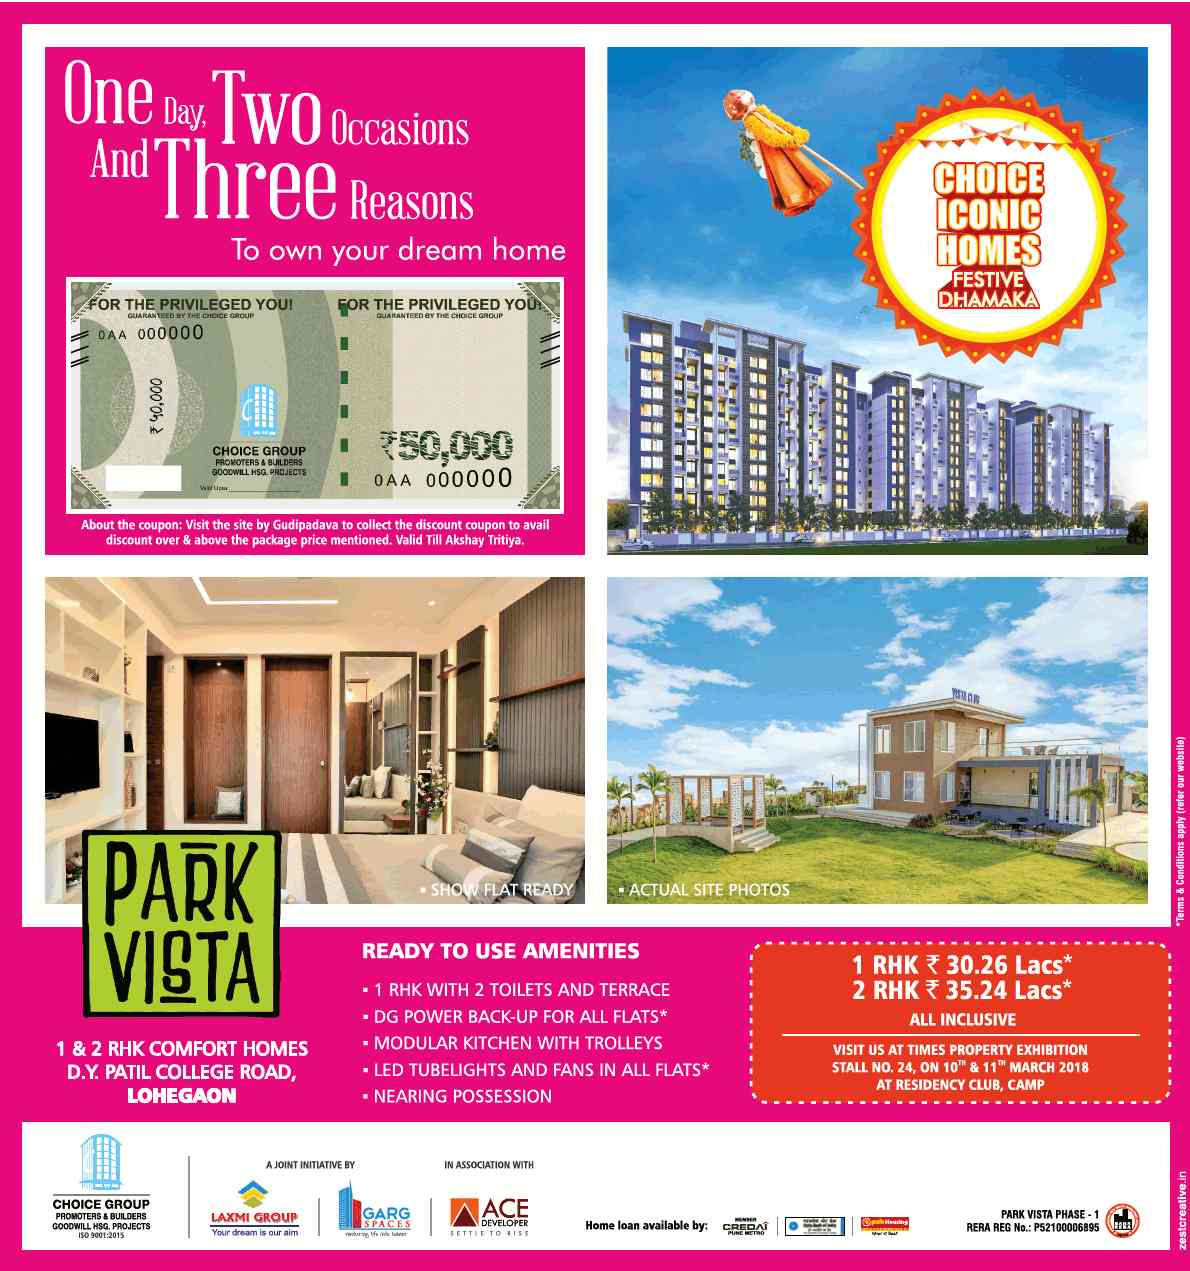 Show flats are ready at Choice Park Vista in Pune Update